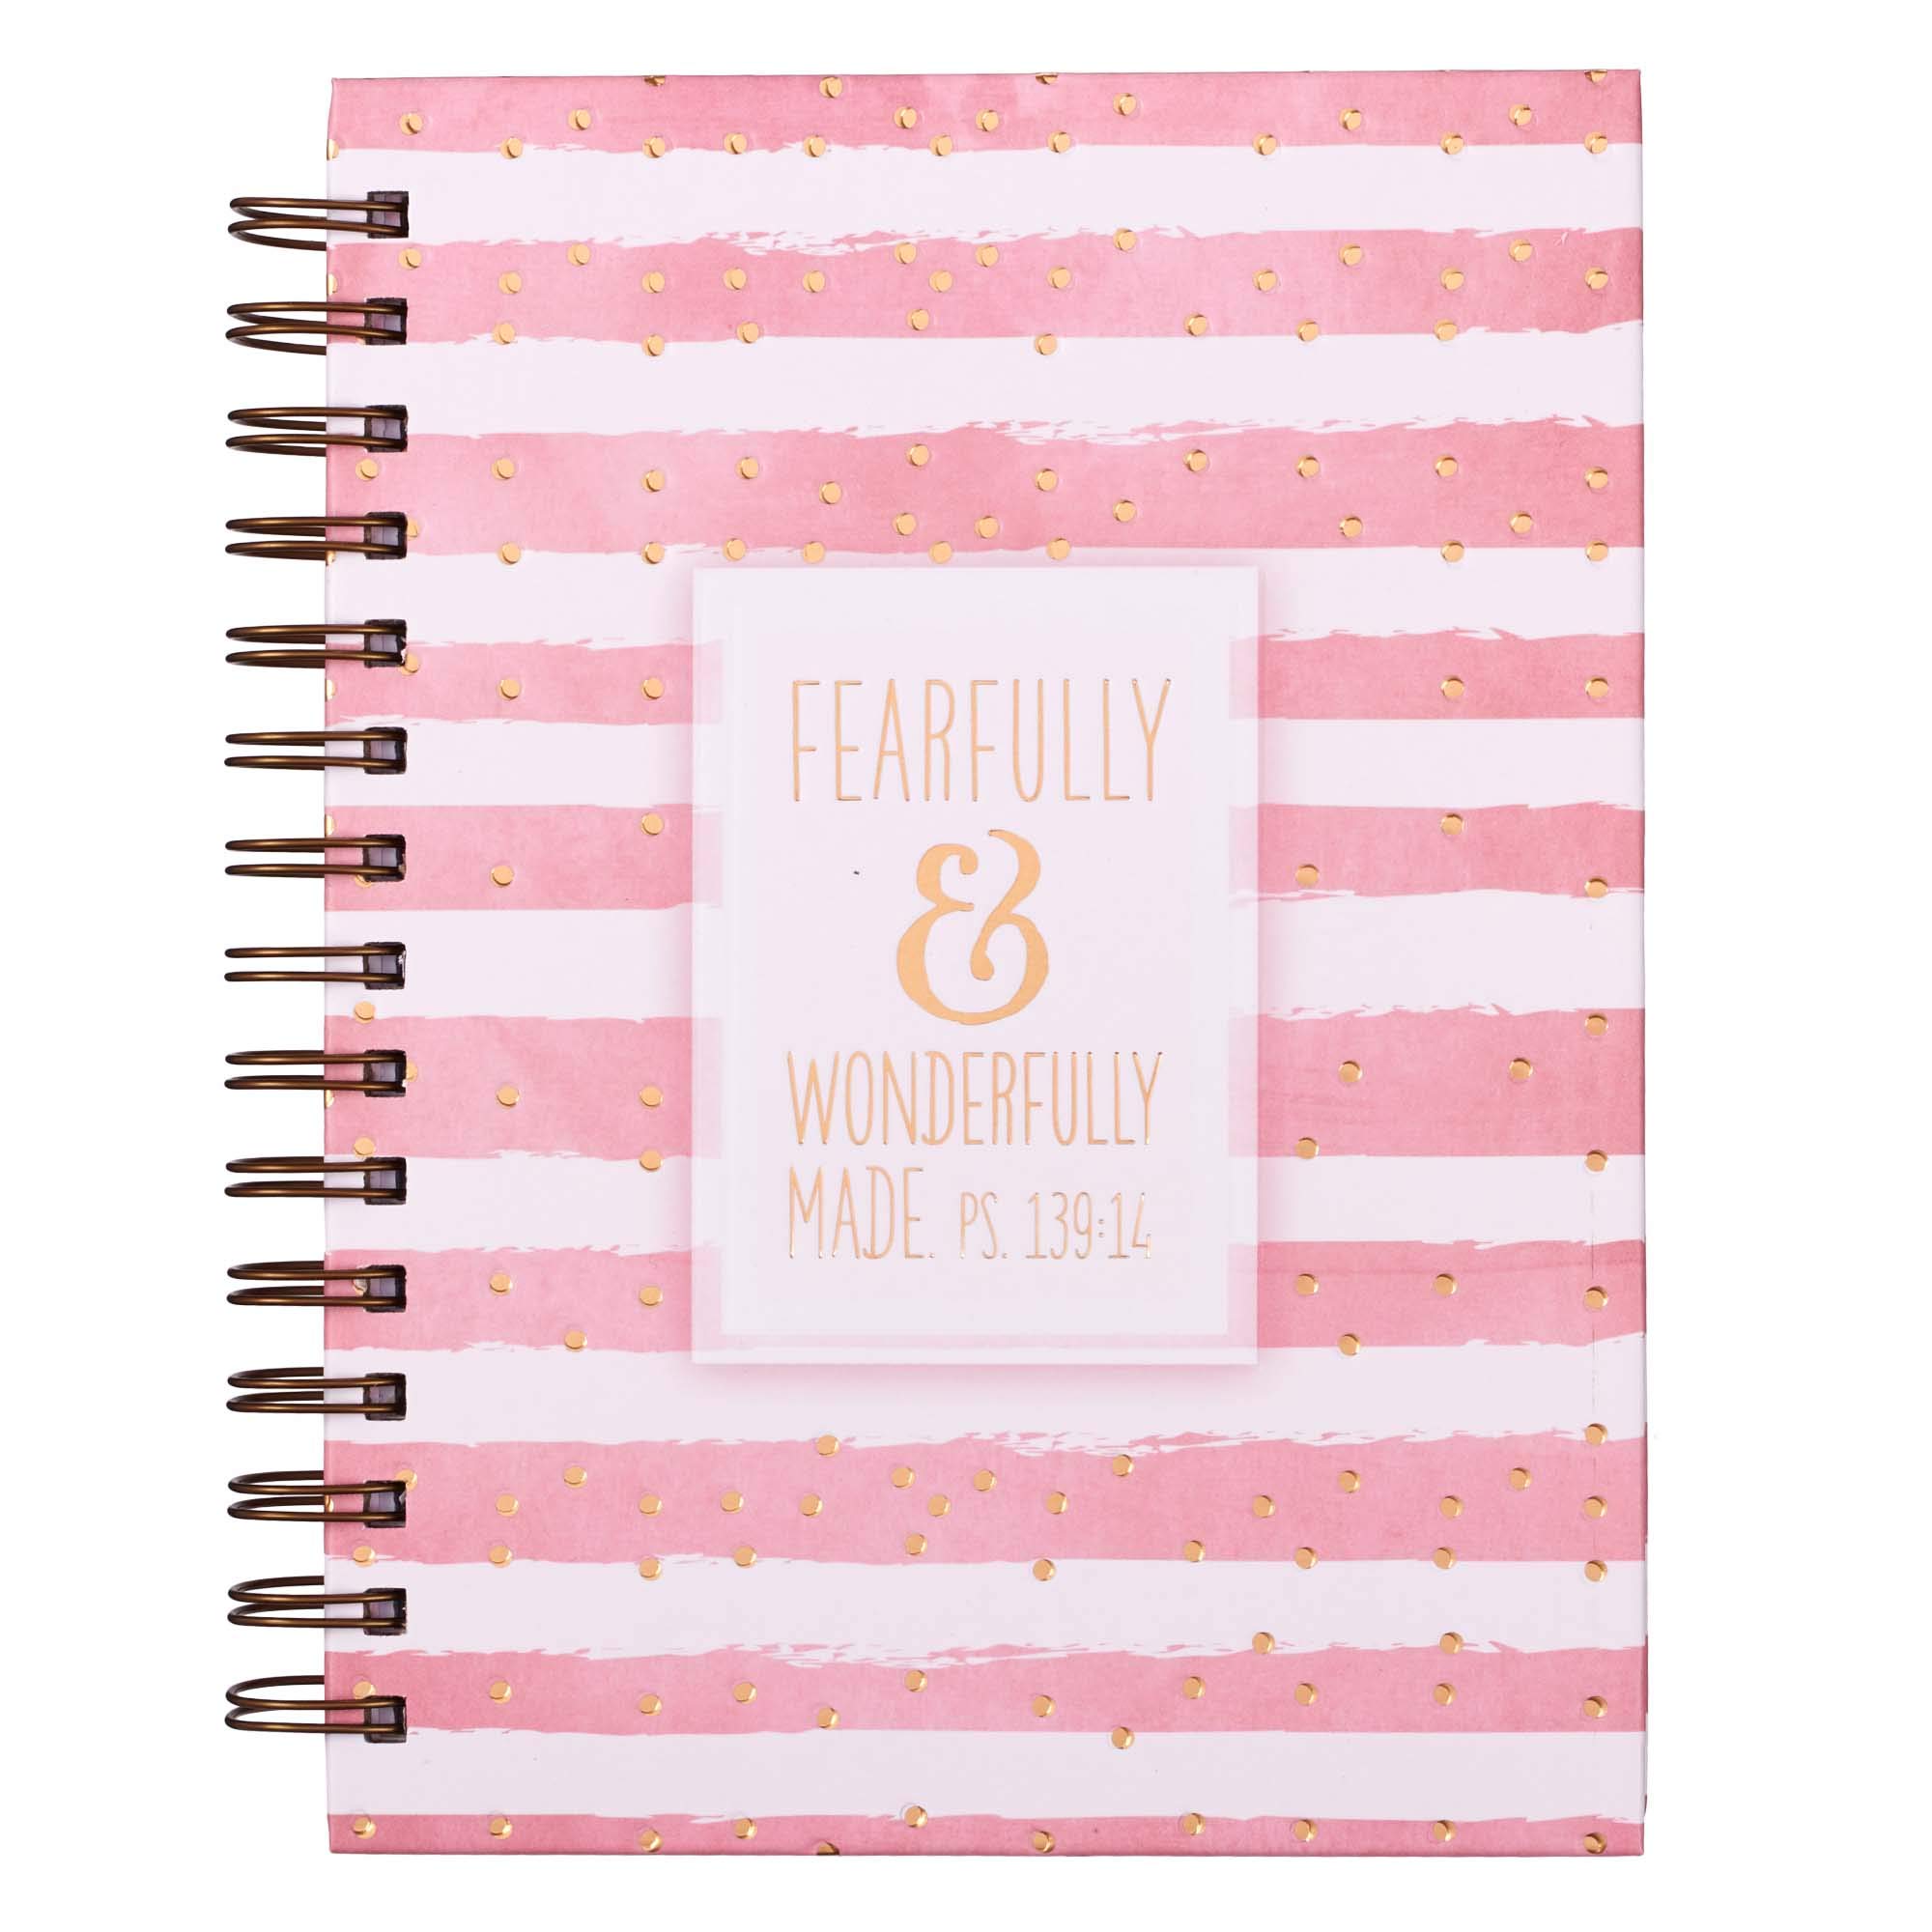 Christian Art Gifts Large Hardcover Notebook/Journal | Fearfully and